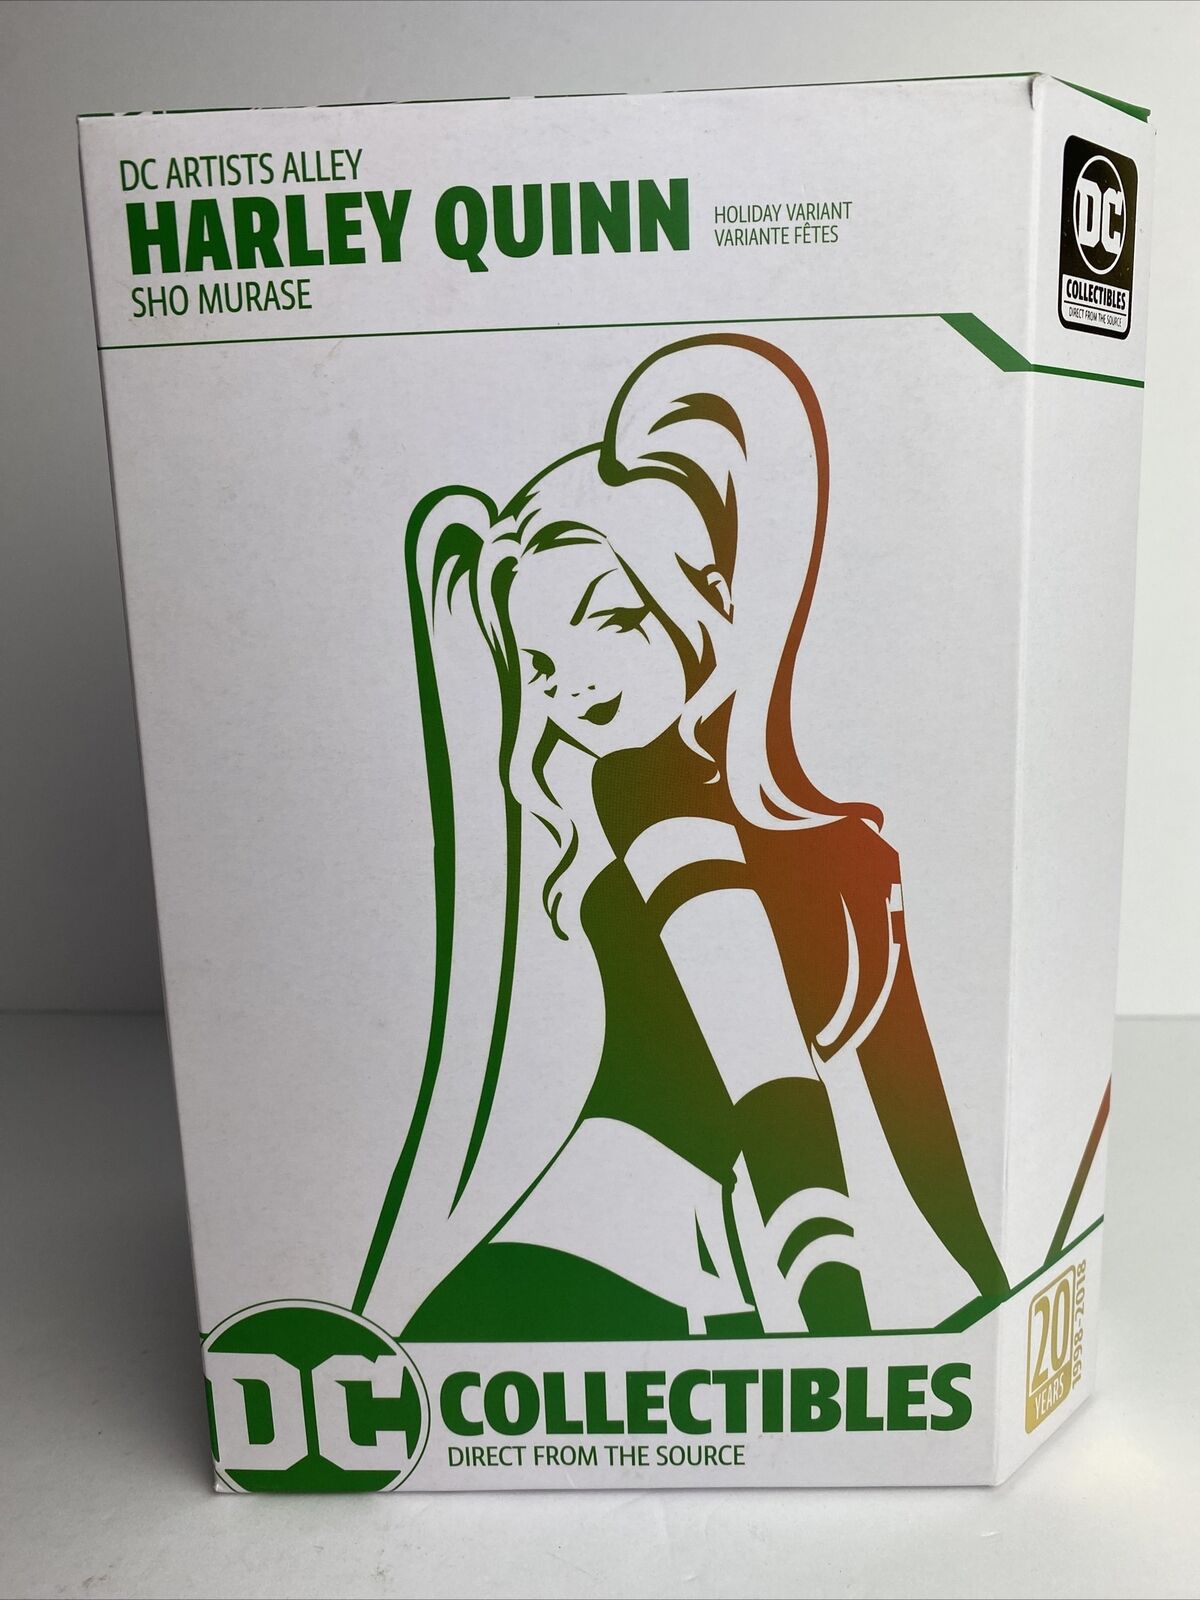 DC Artist Alley Harley Quinn Holiday Variant PVC Collector Statue By Sho Murase